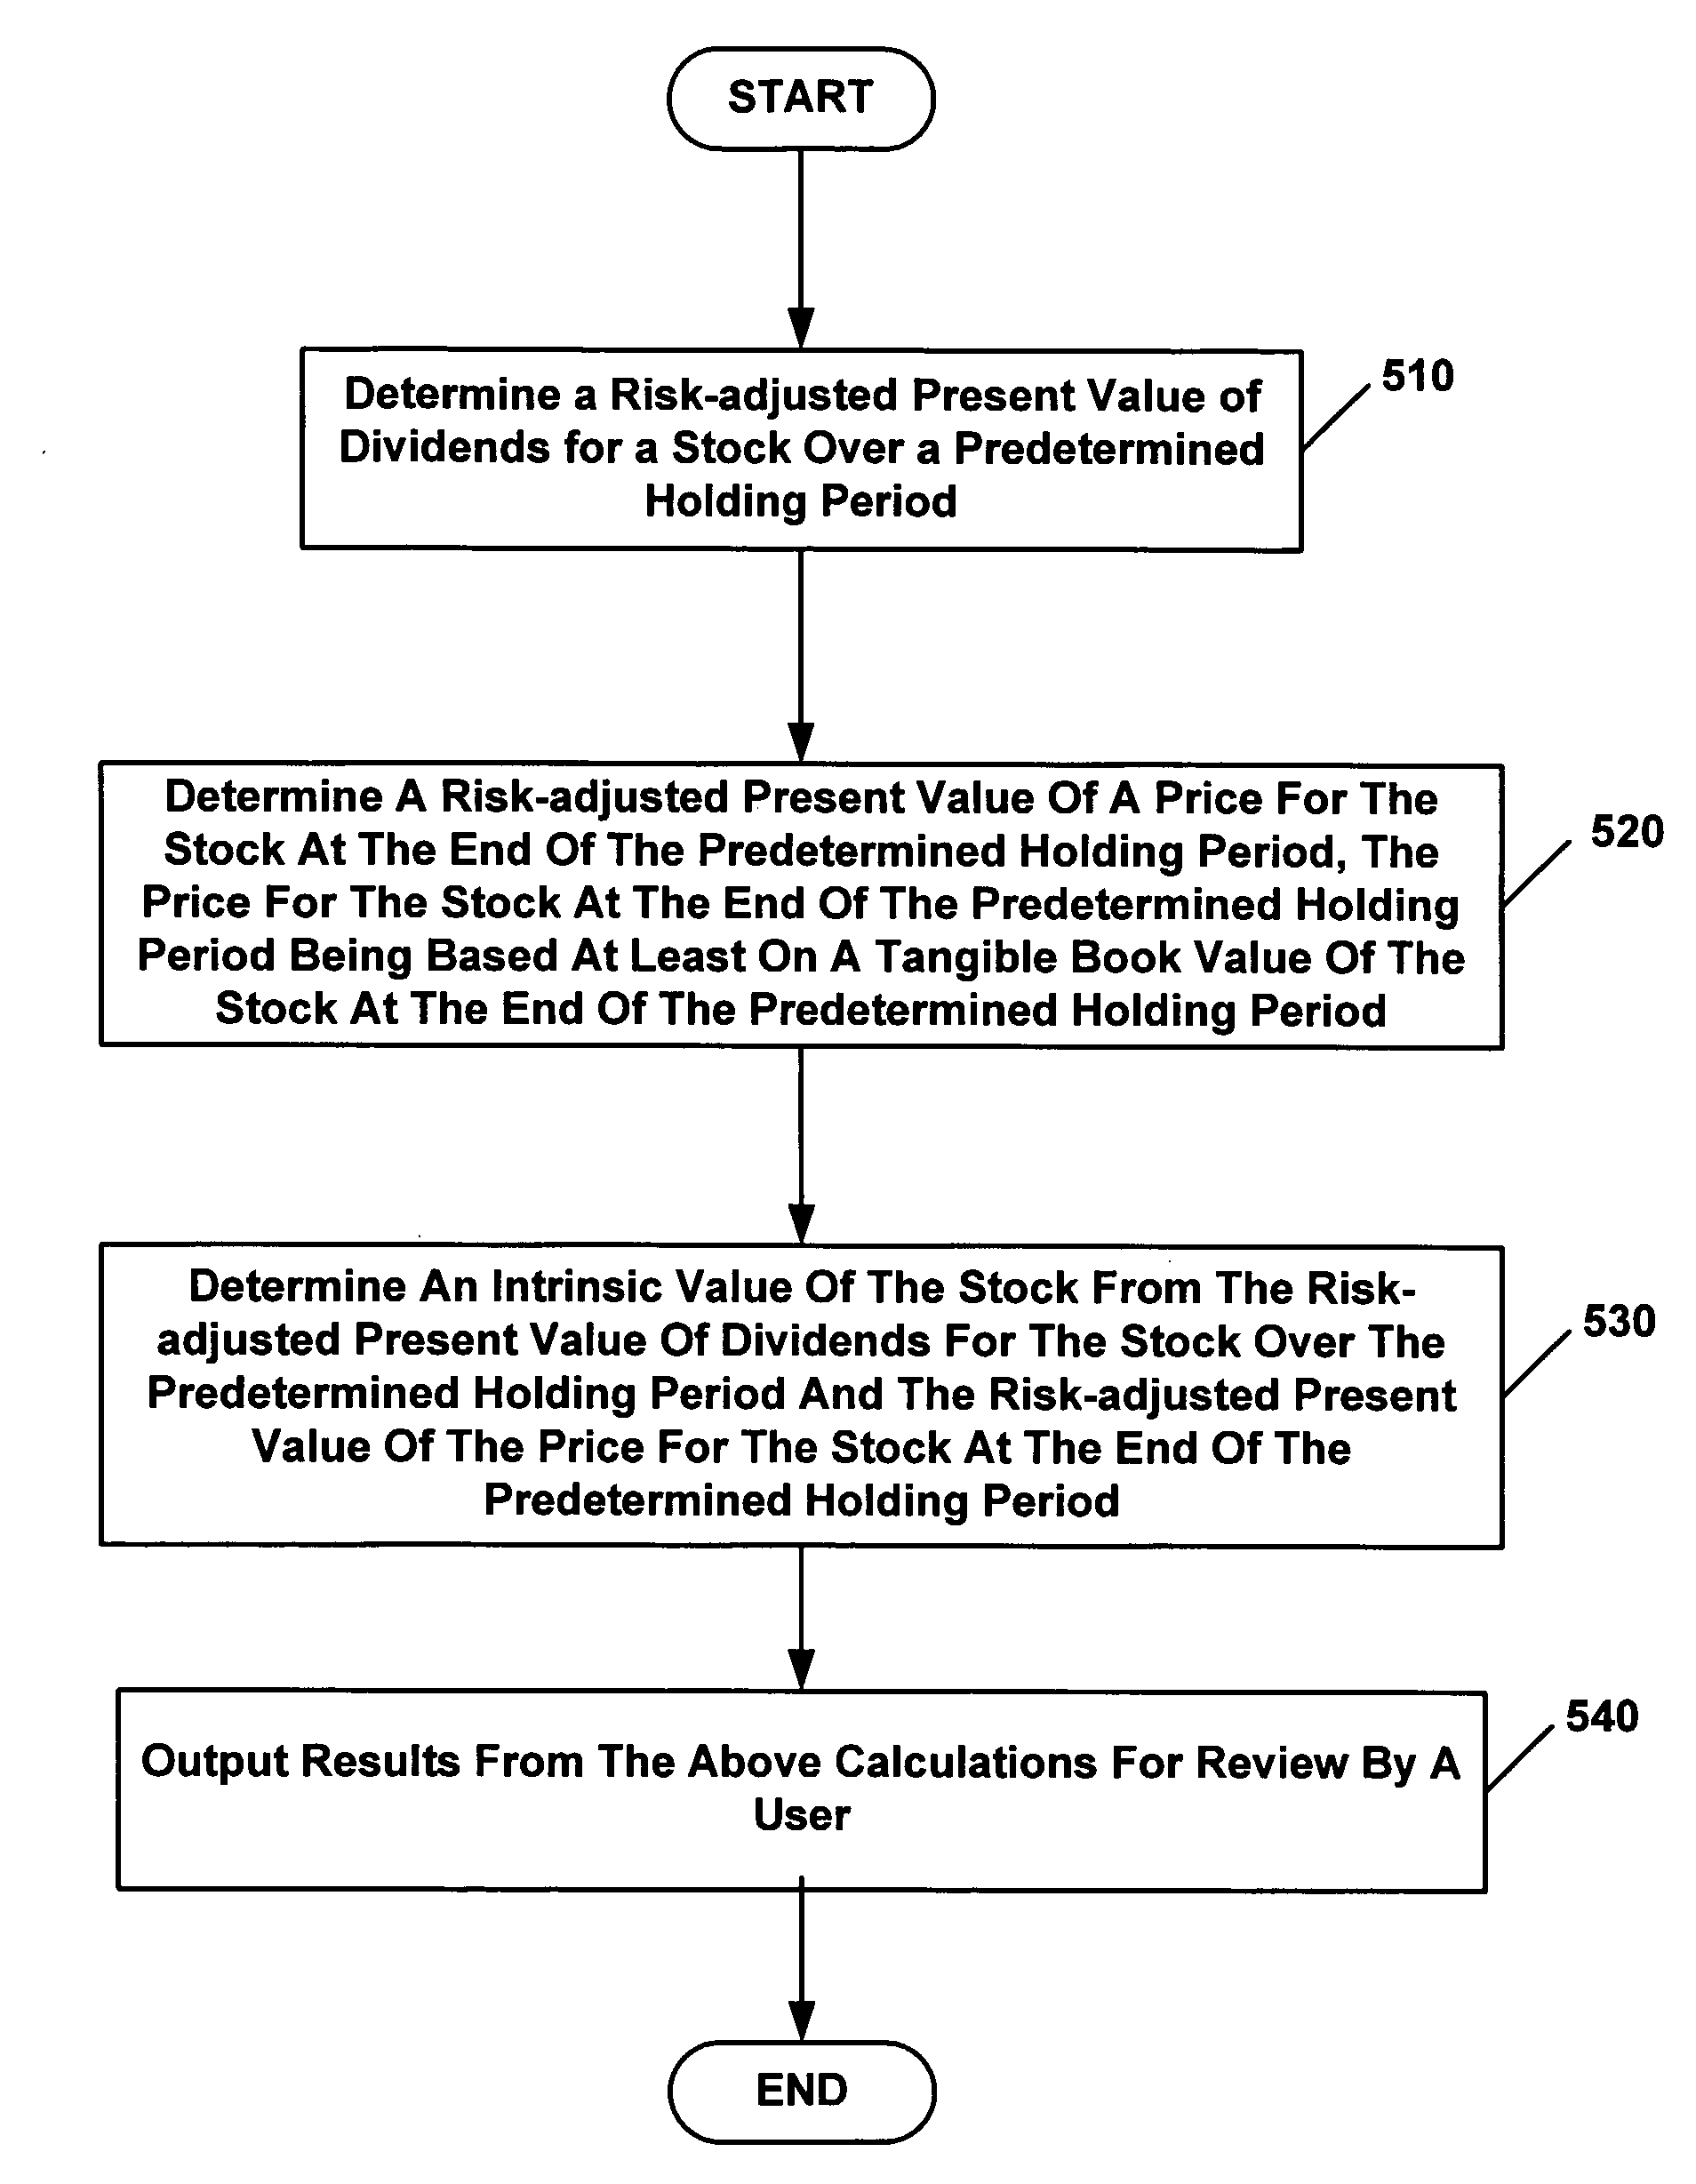 System and Method for Valuing Stocks